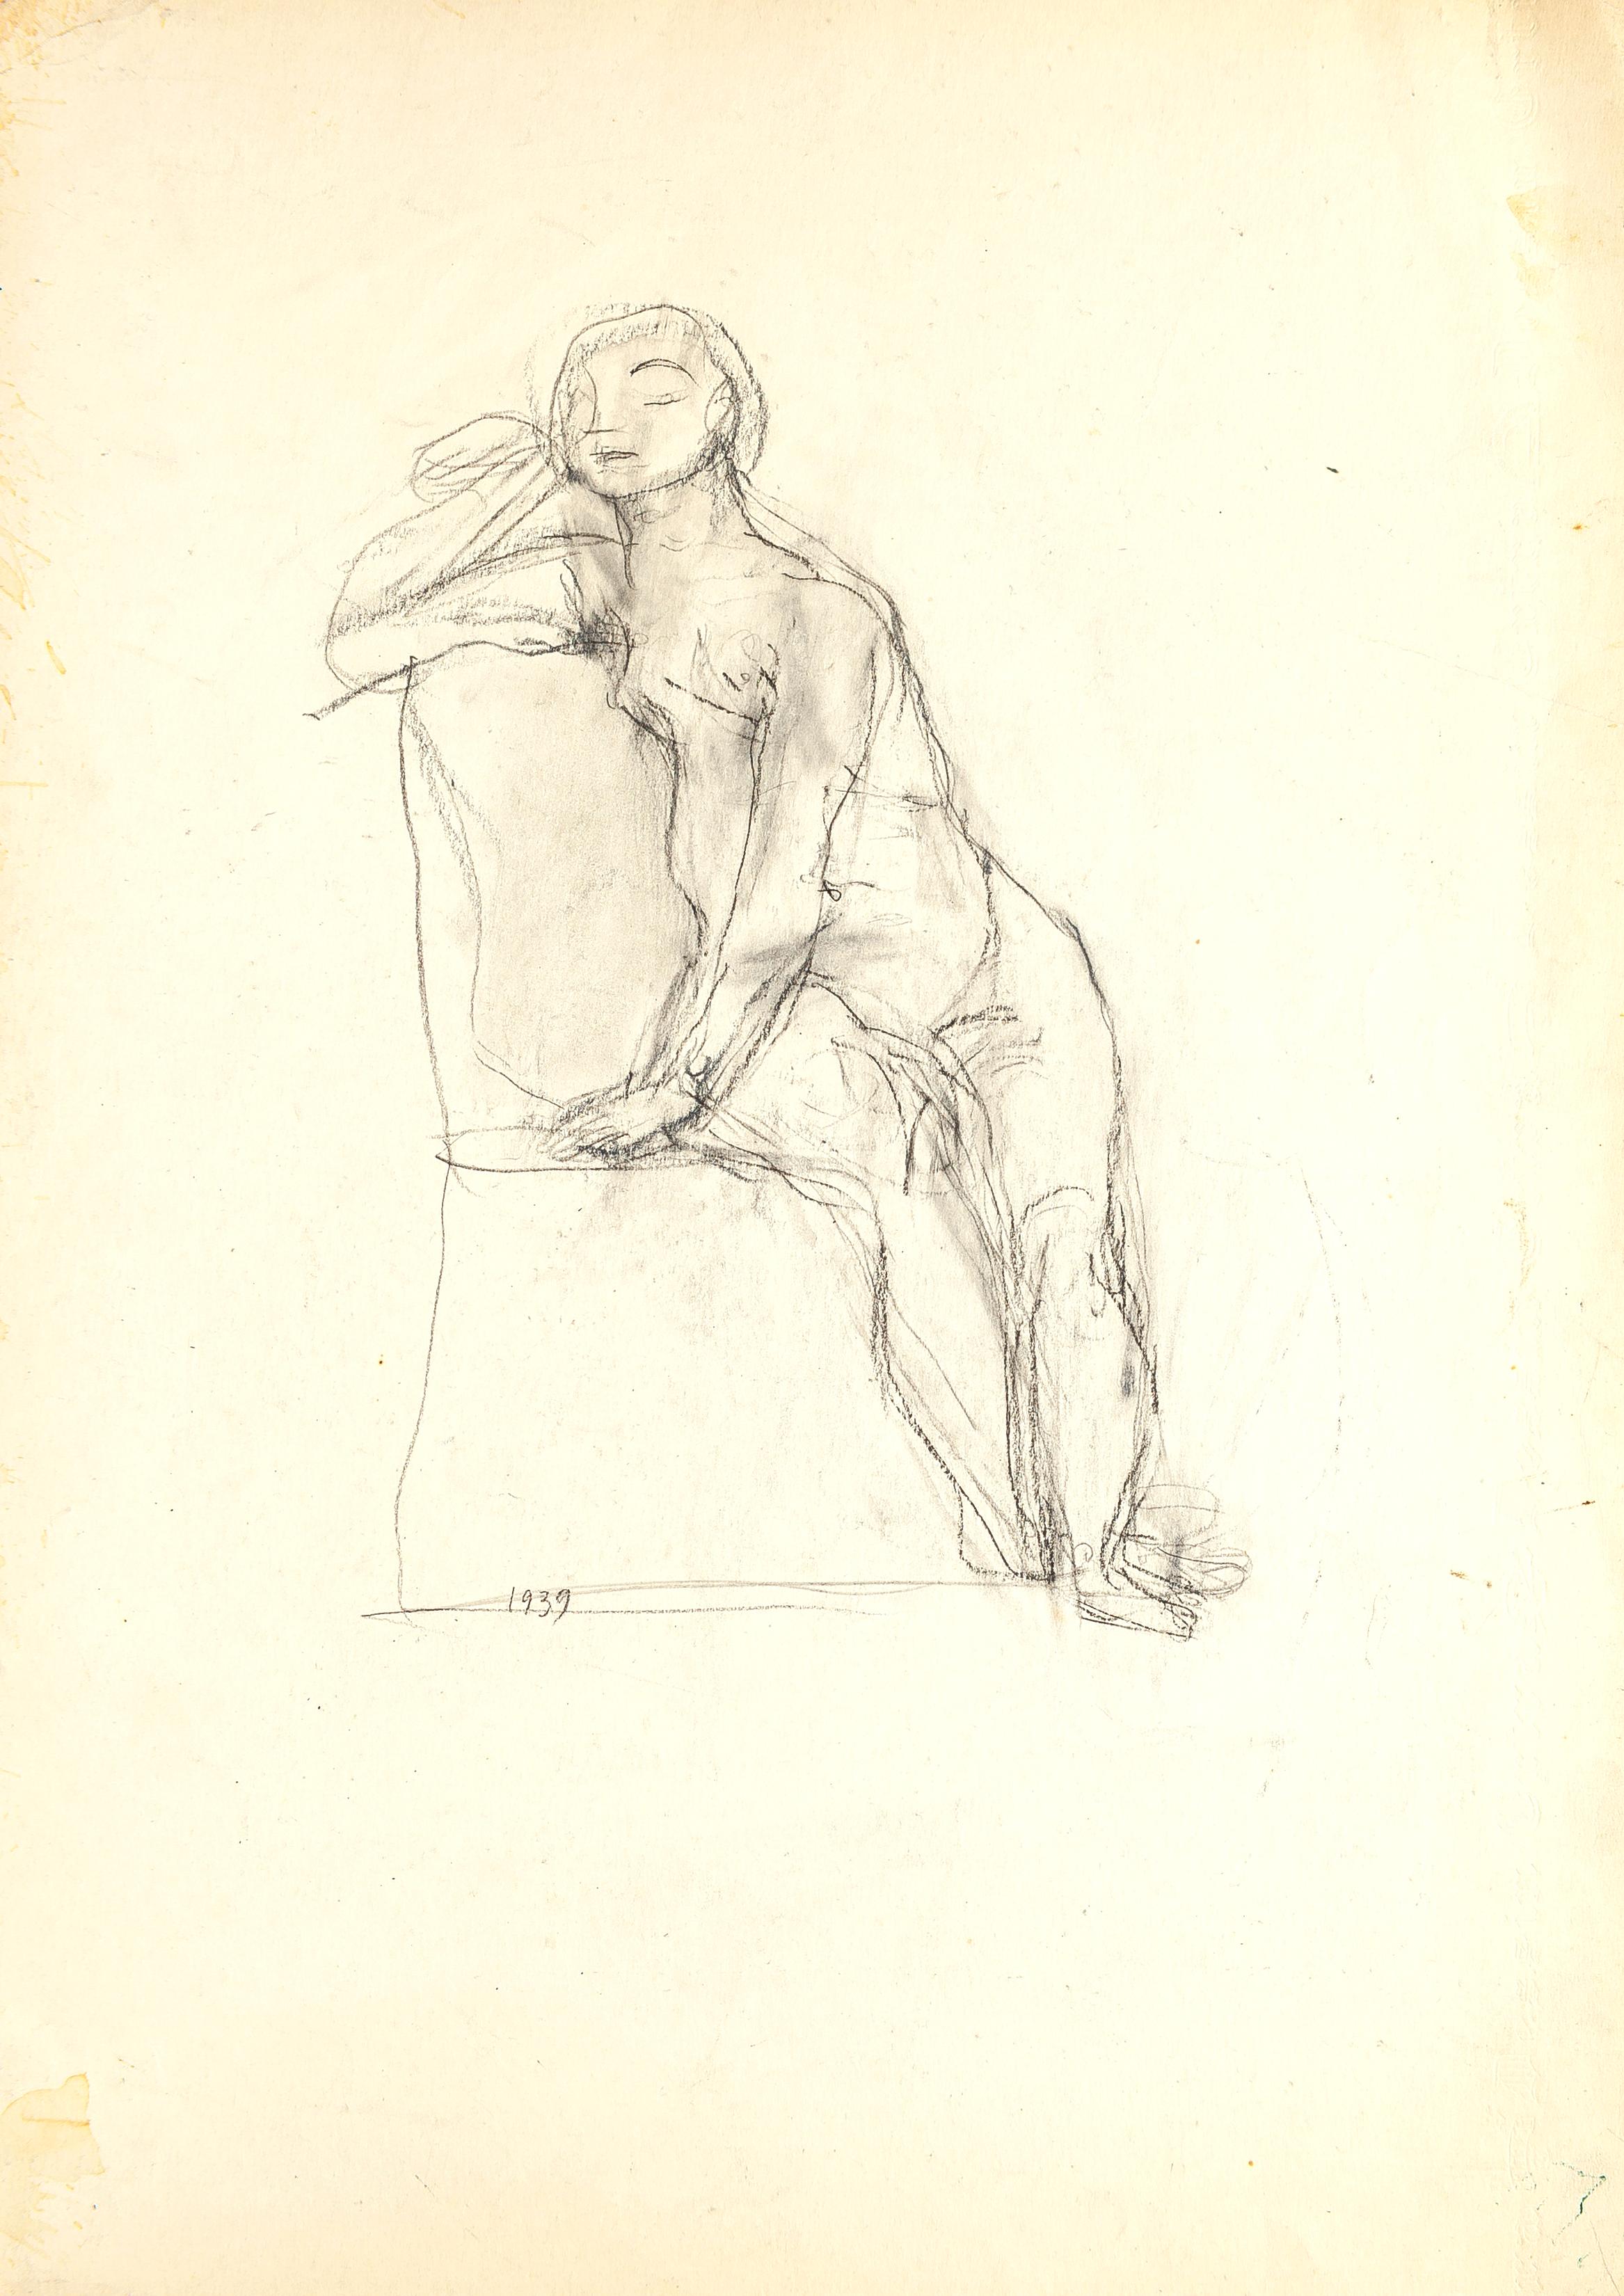 Nude - Original Pencil Drawing by Jeanne Daour - 1939